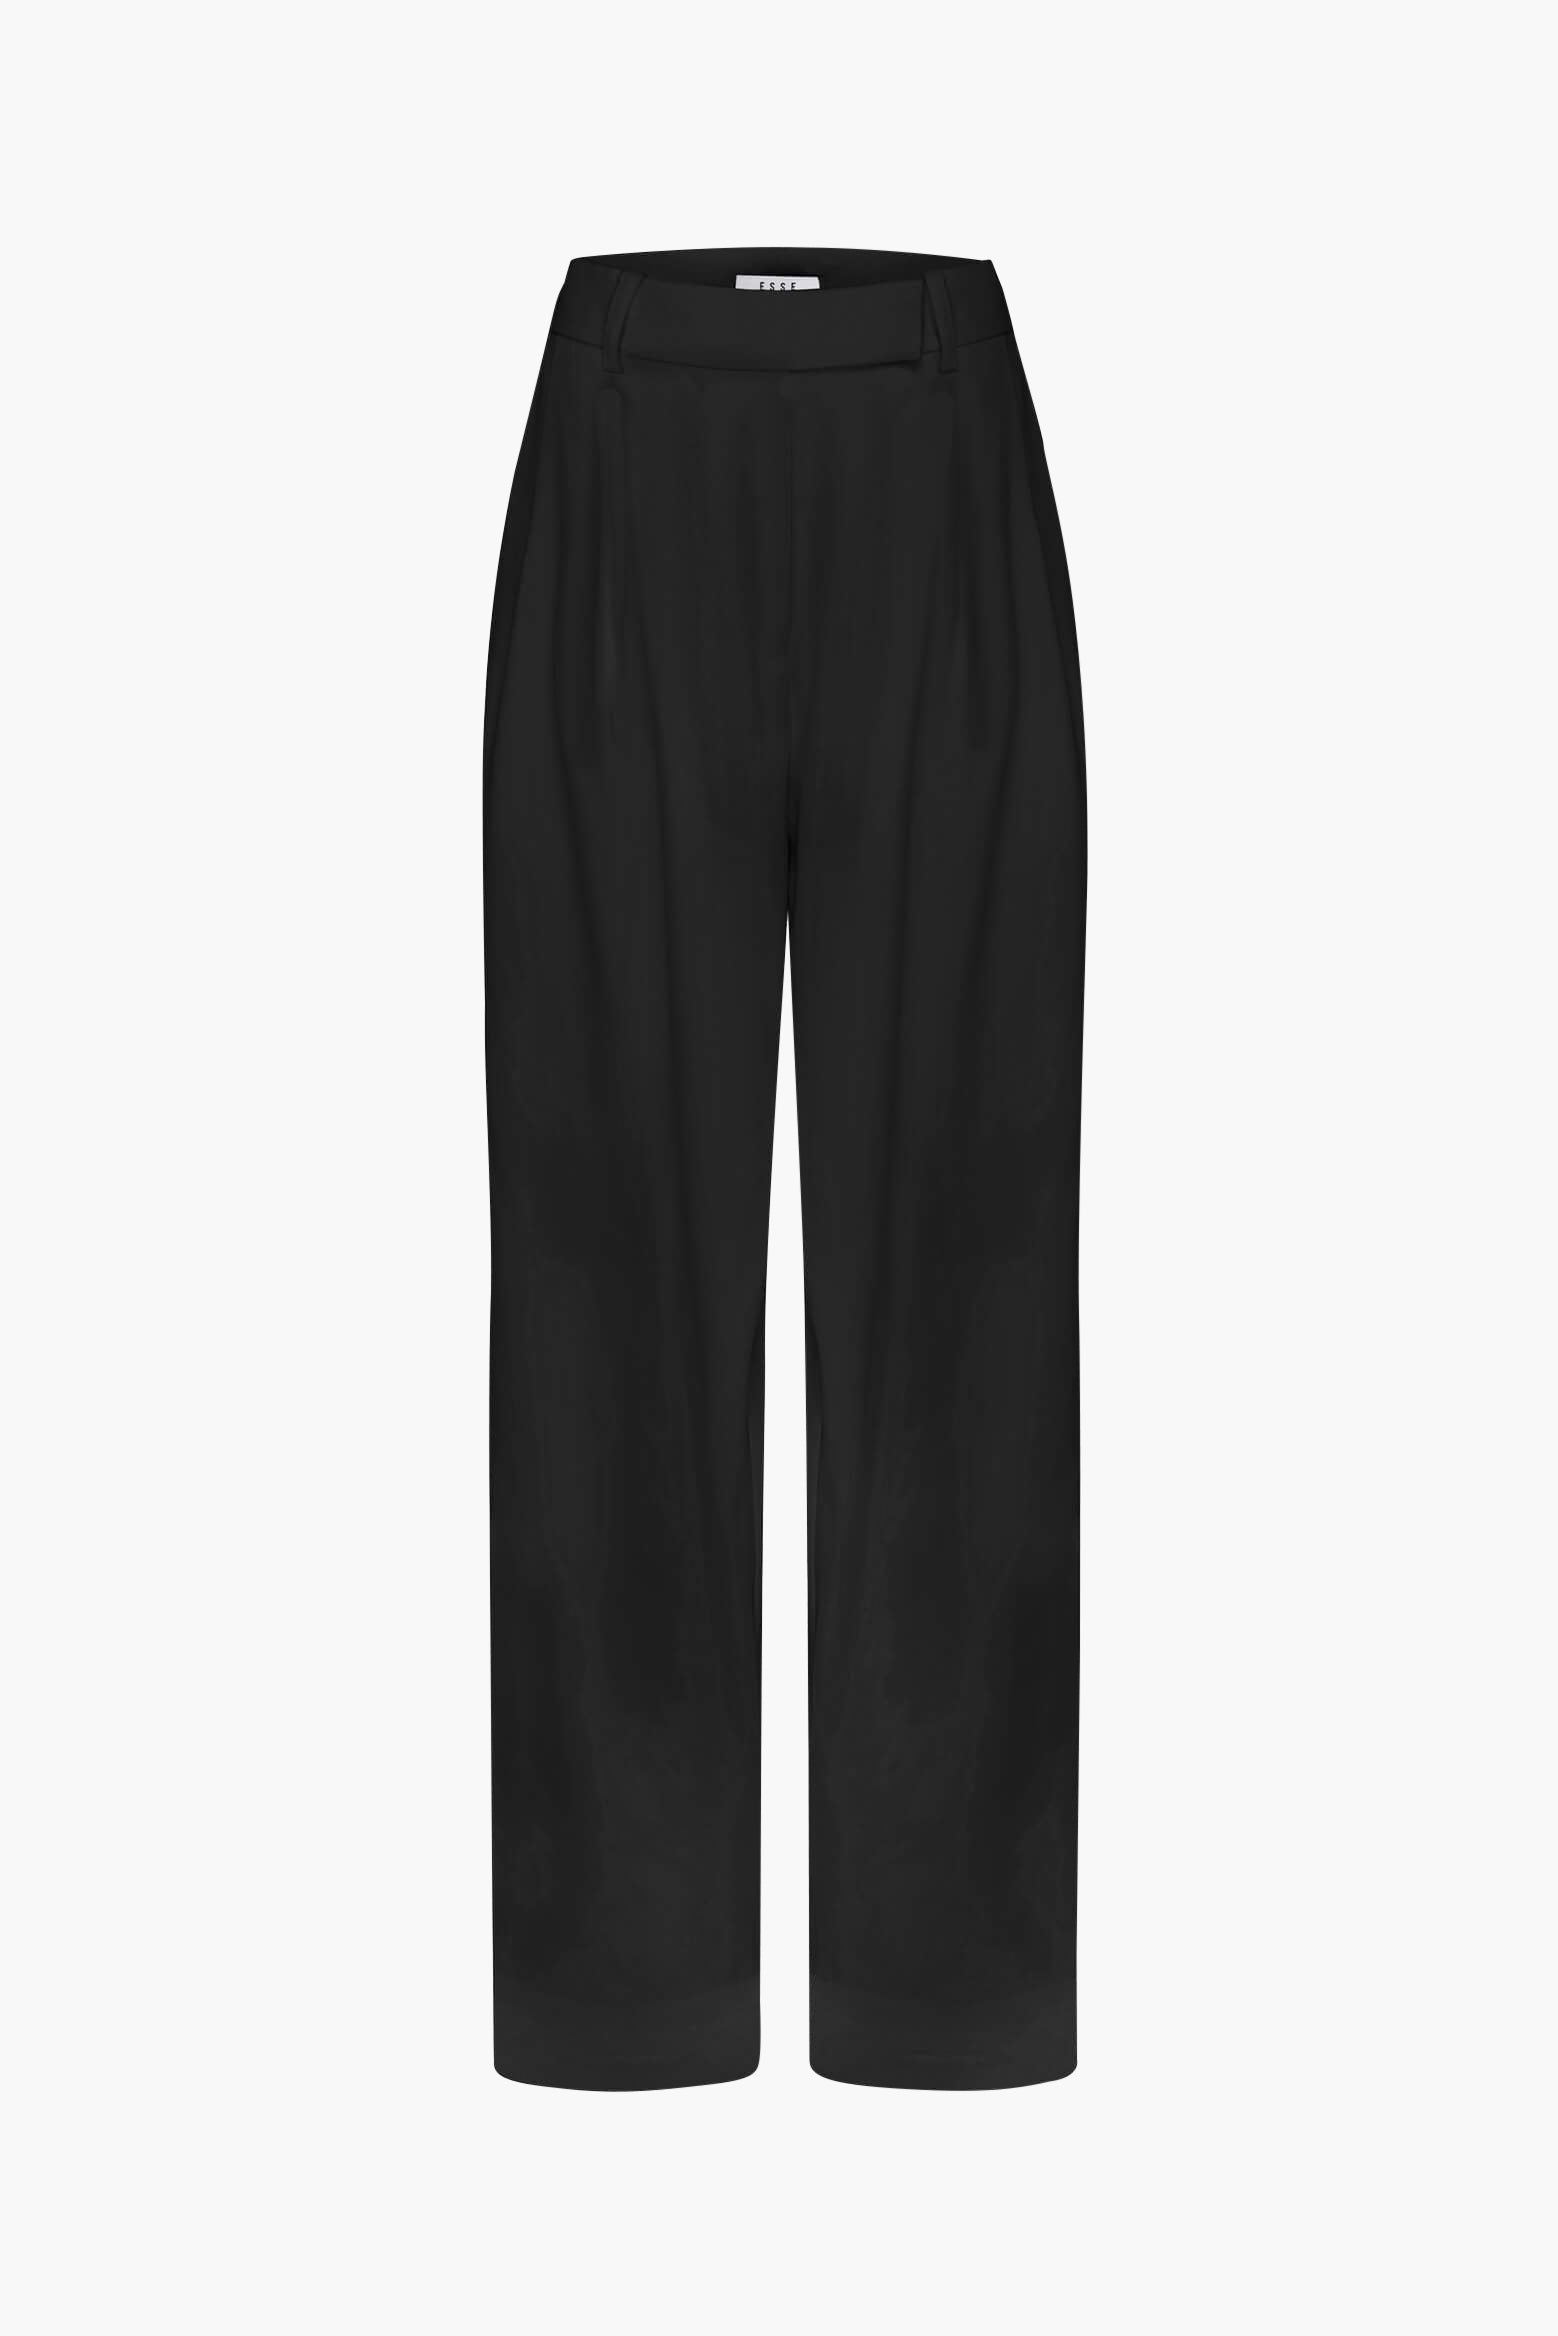 Esse | Tailored Trouser in Black | The New Trend